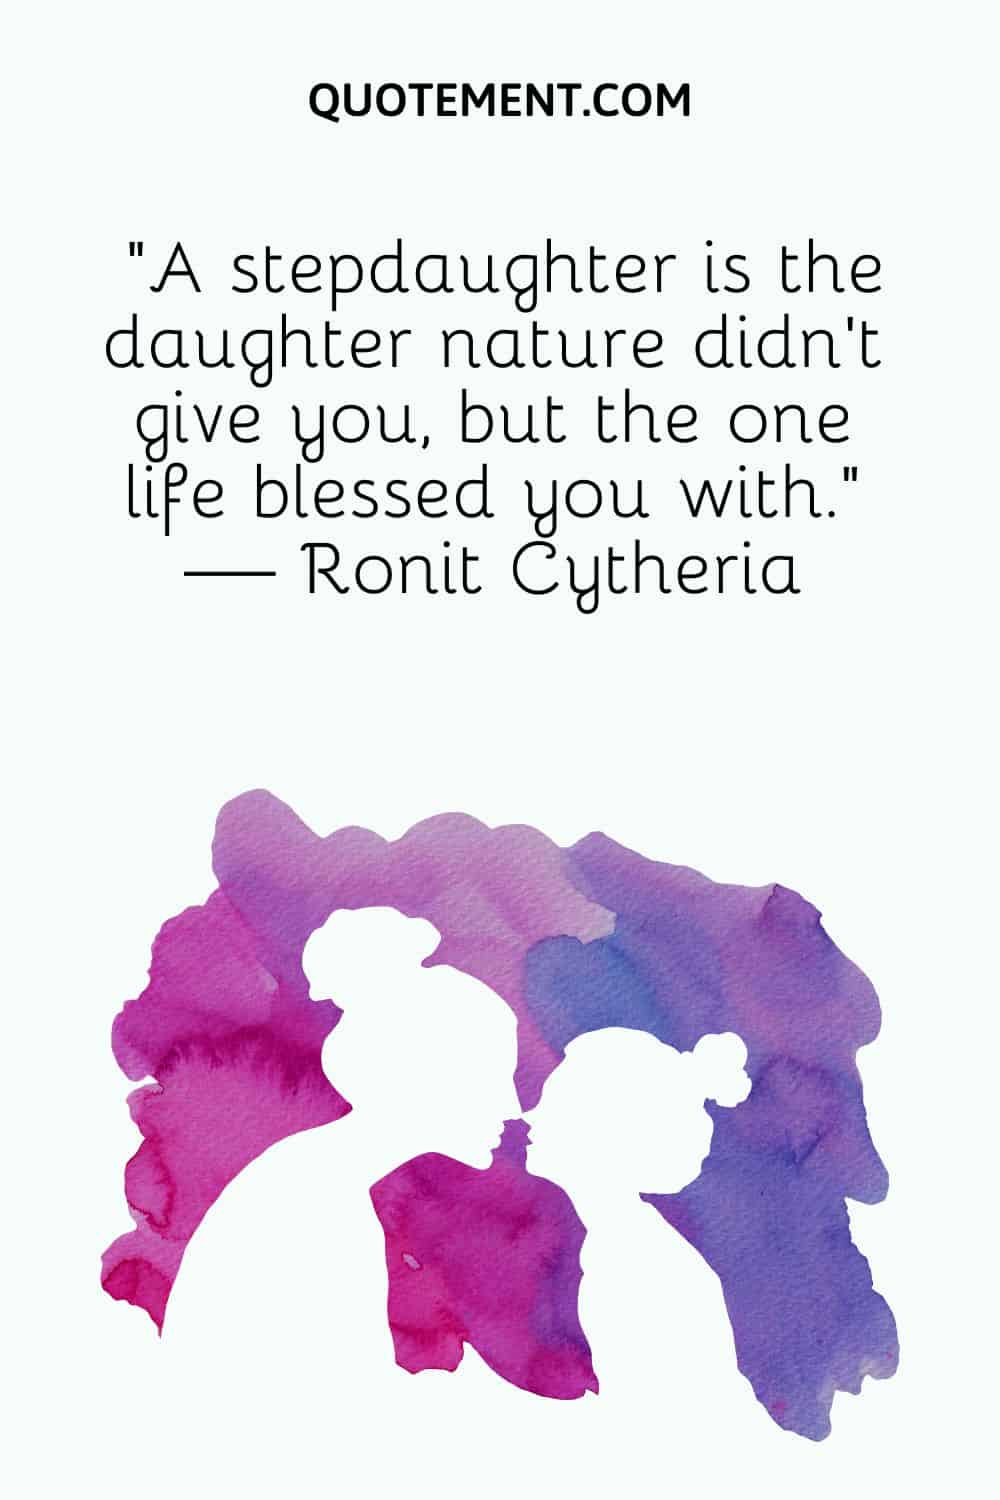 A stepdaughter is the daughter nature didn’t give you, but the one life blessed you with.